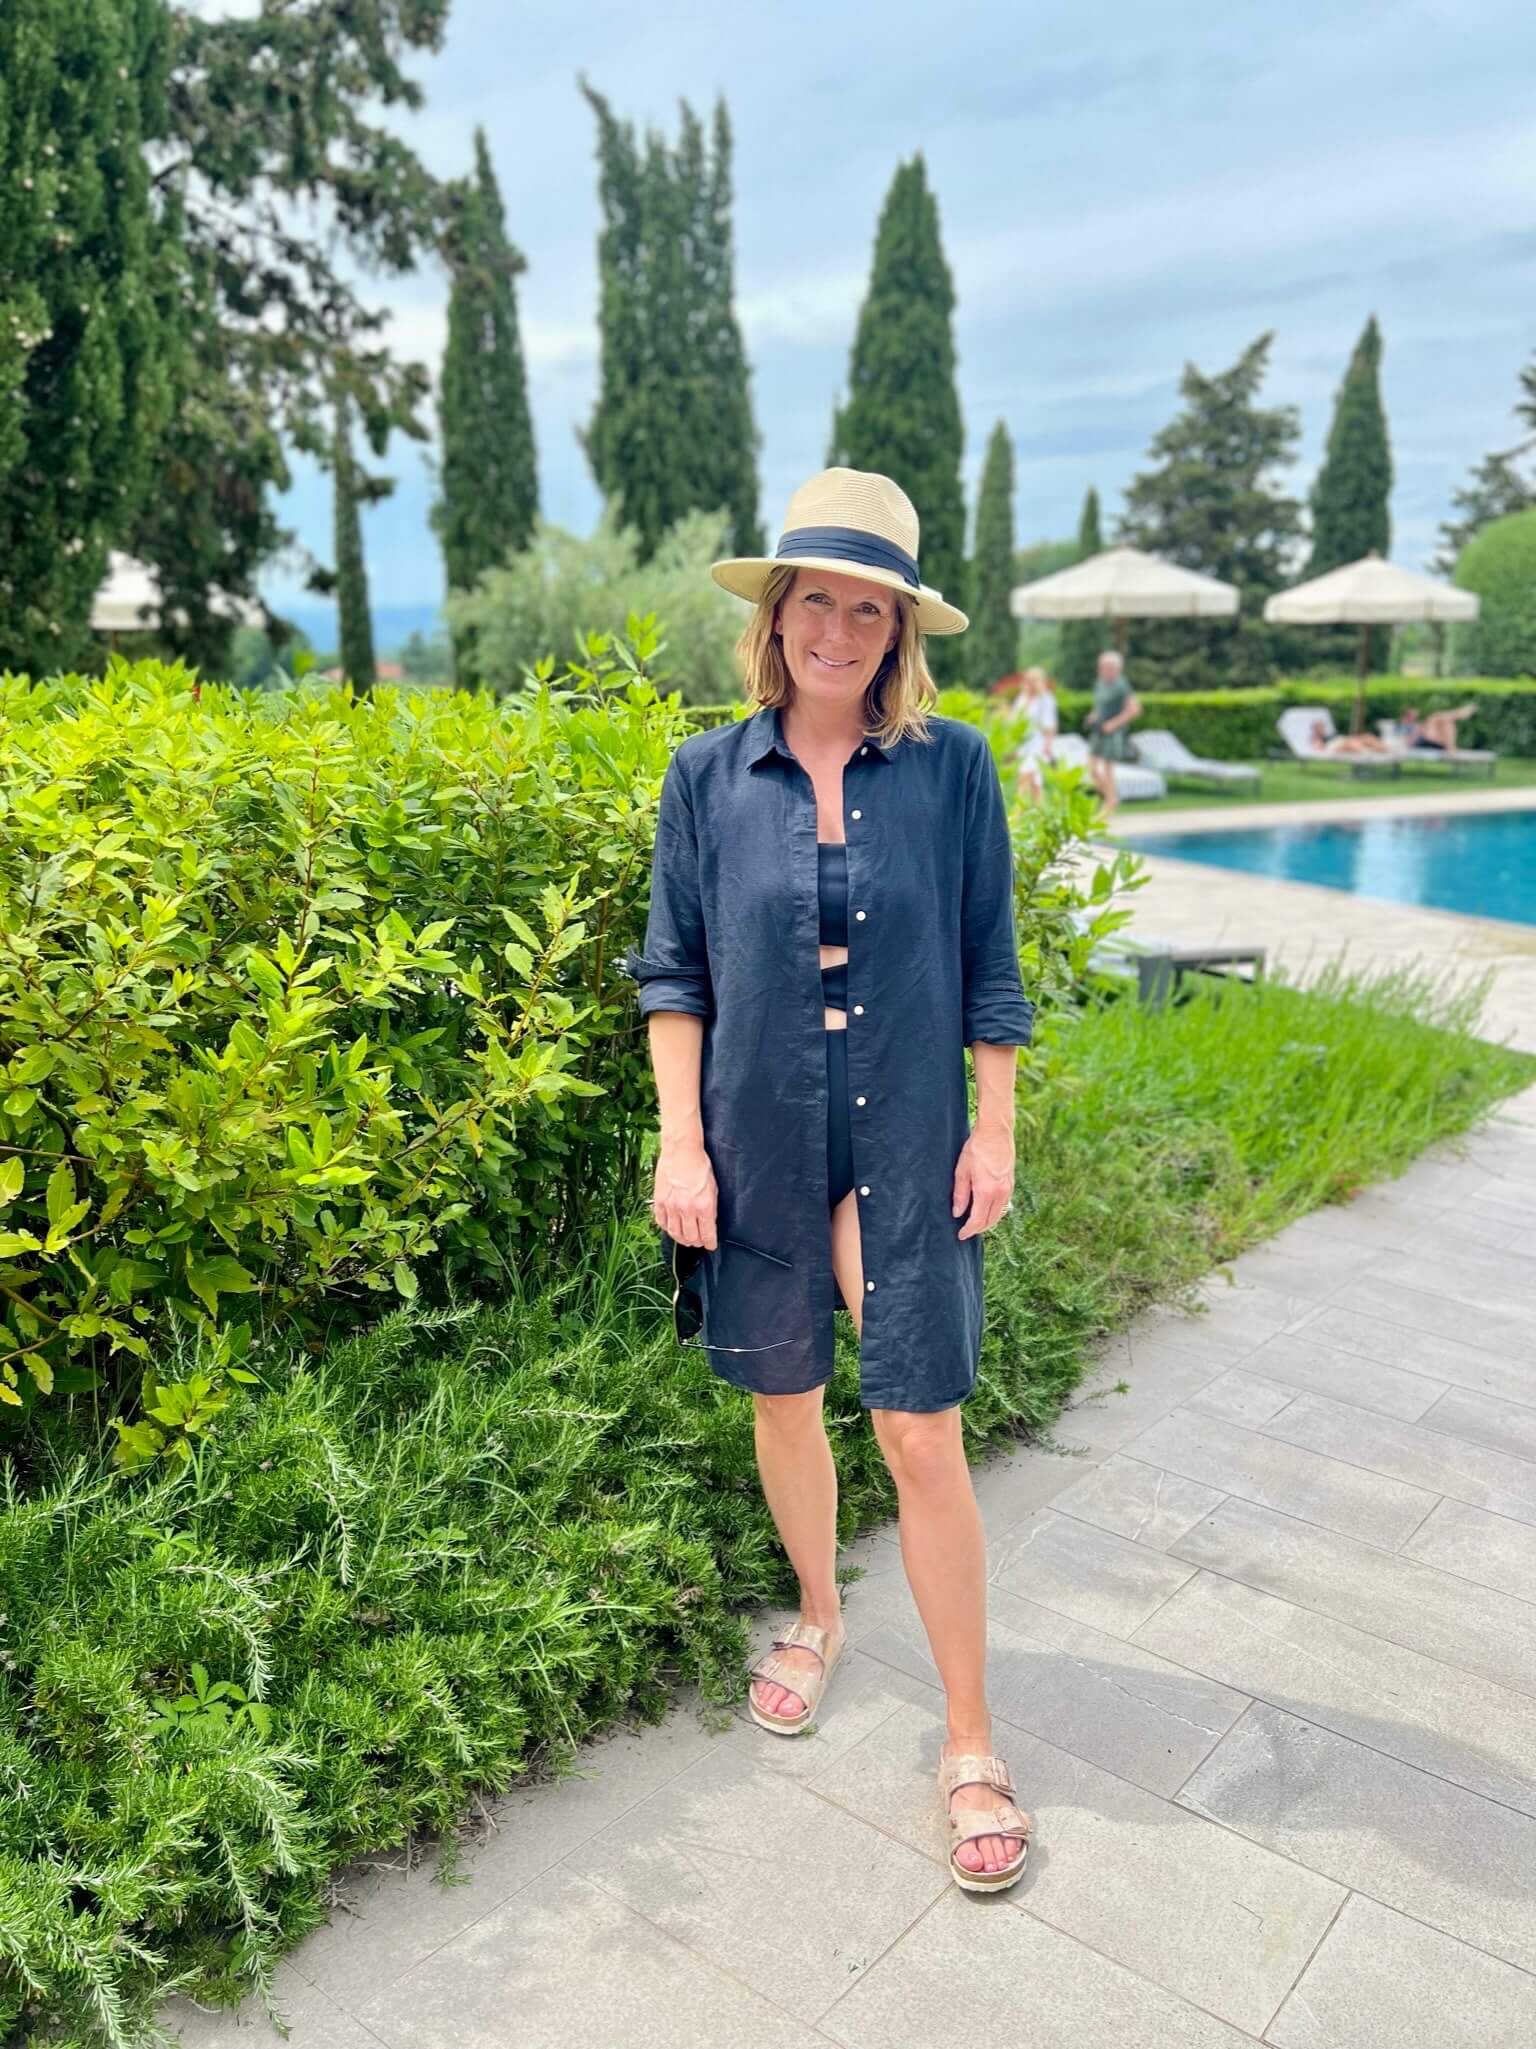 Shirtdress Cover Up & Strapless Cutout Swimsuit what to wear at a resort resort wear for summer poolside style inspiration what to wear to the hotel pool